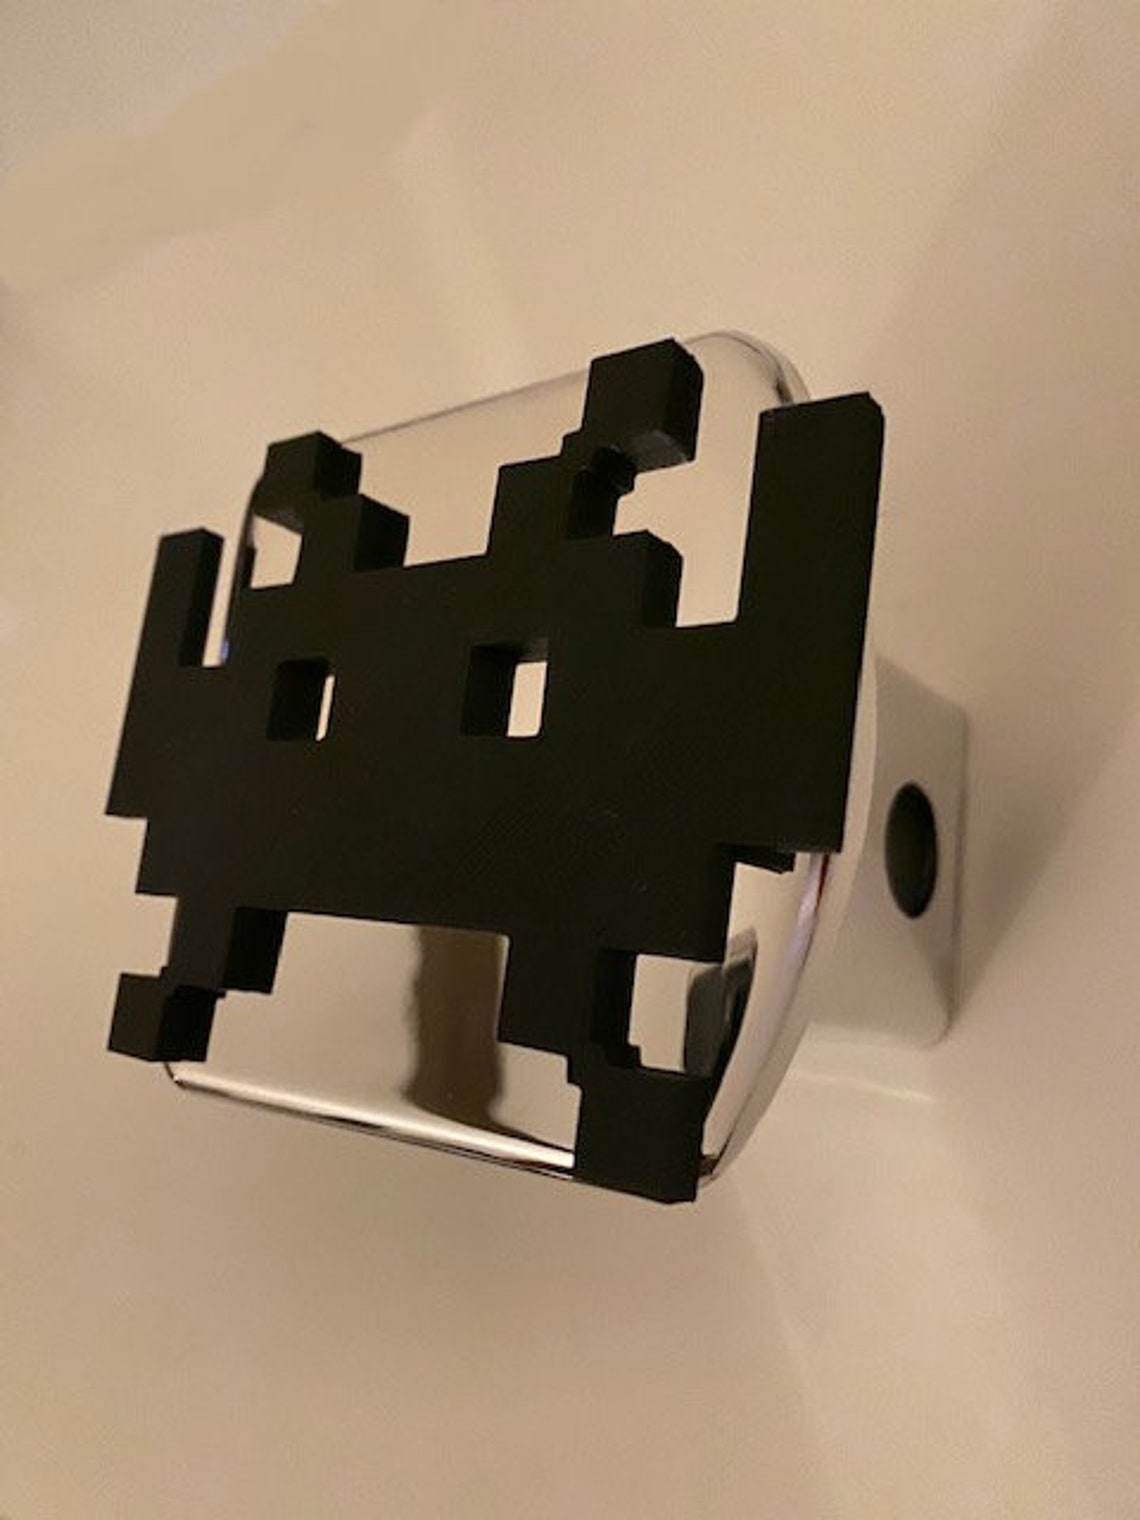 Space Invaders In 8 Bit In 3d Chrome With Black 2 Inch Etsy